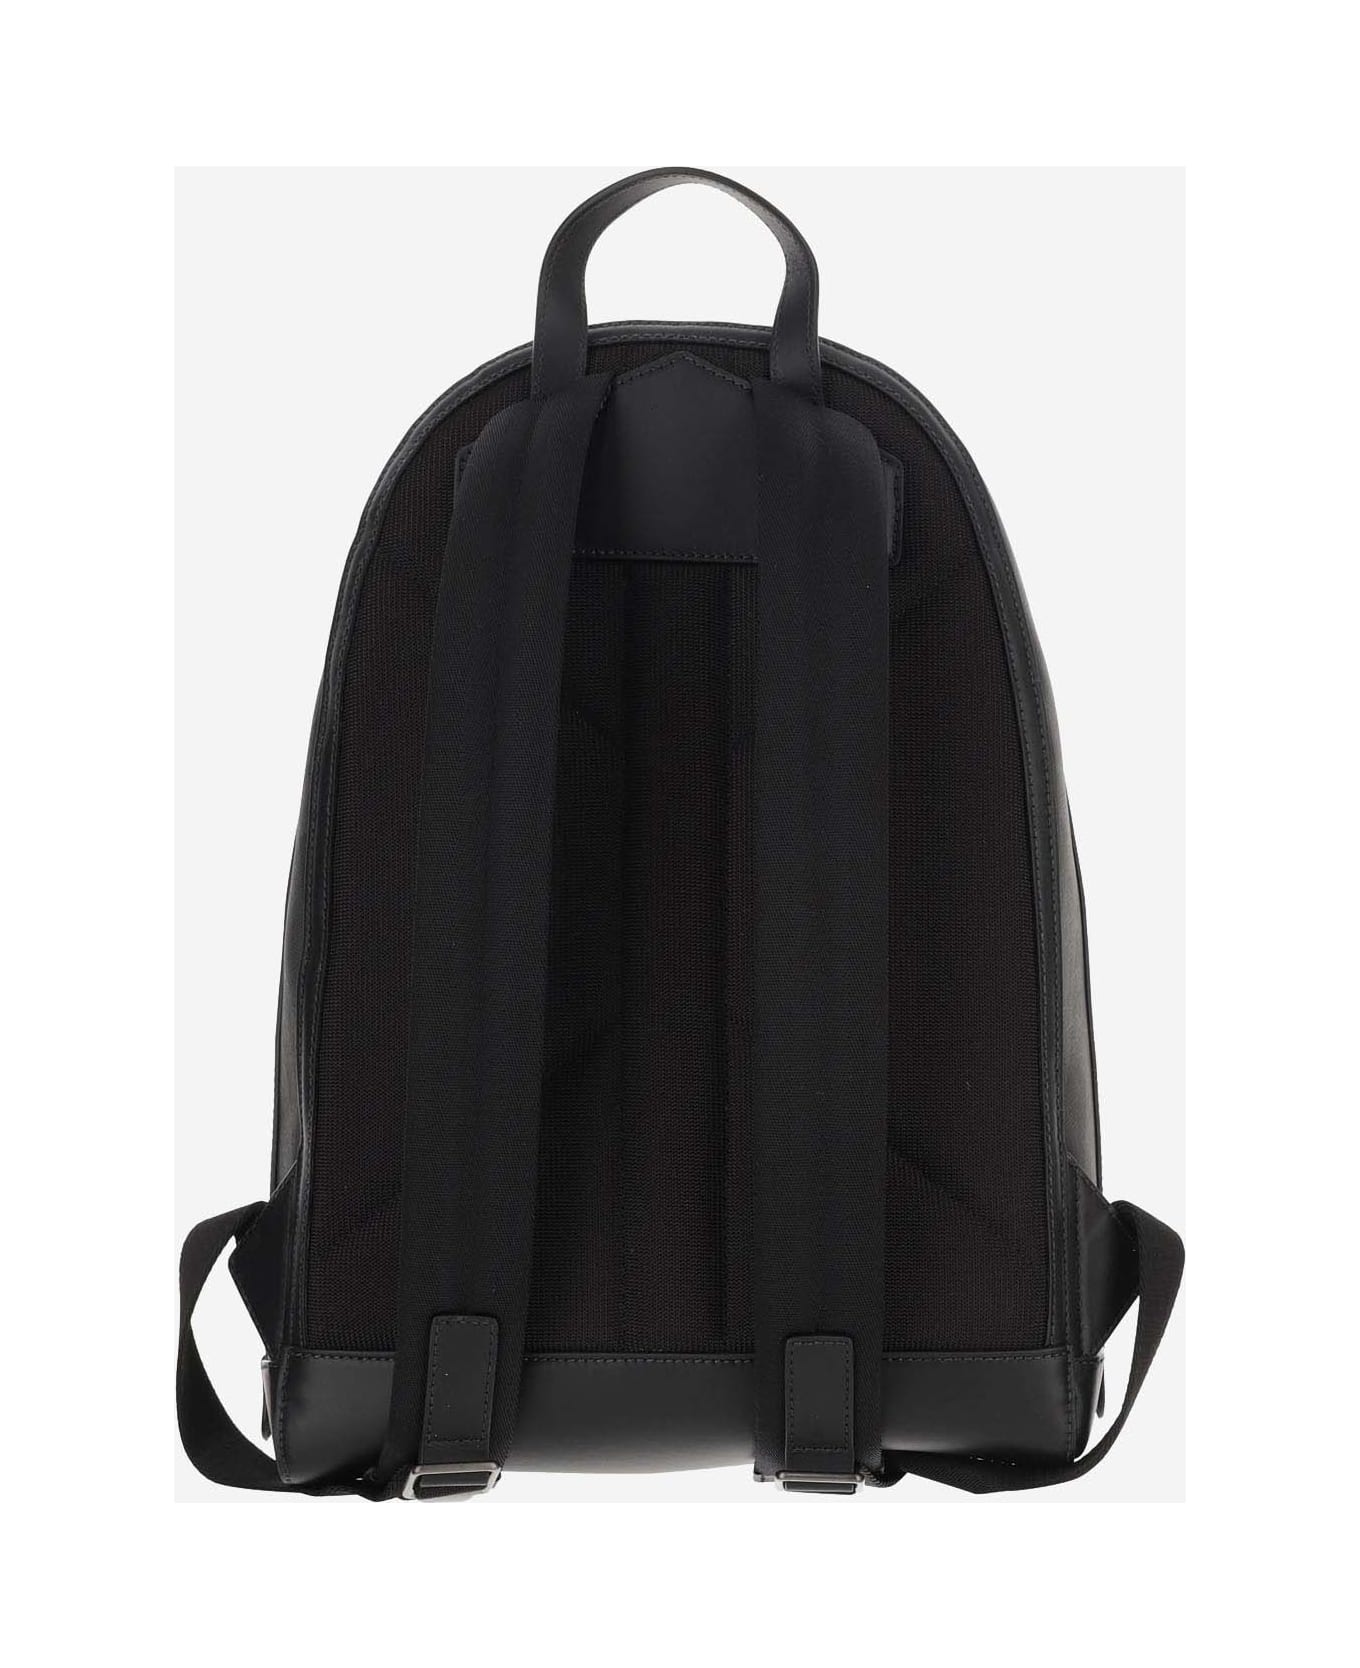 Burberry Rocco Backpack With Check Pattern - Charcoal バックパック